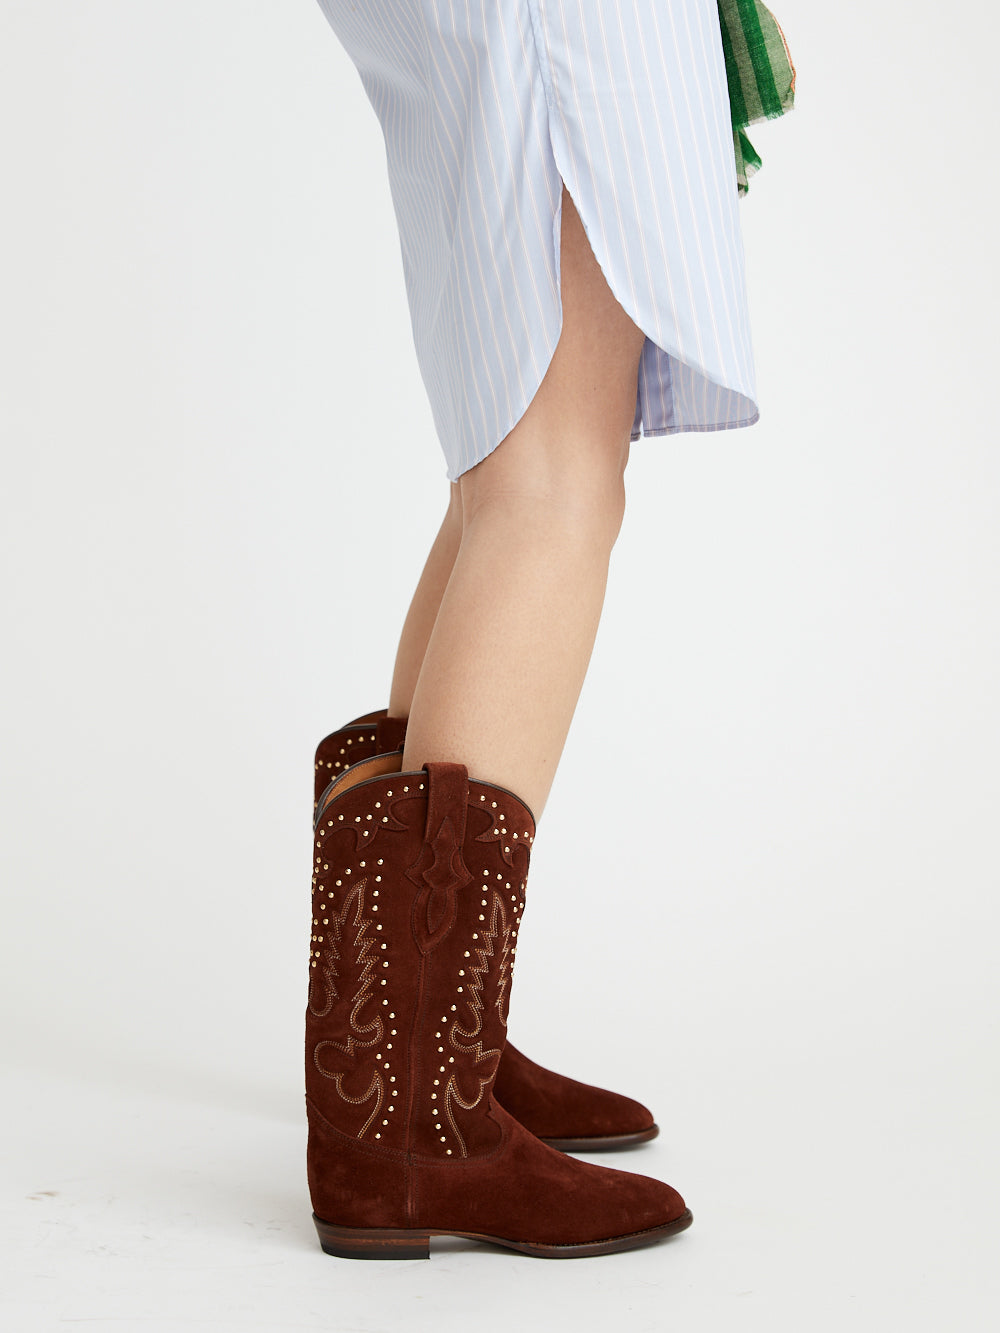 BOTTES STUDS SHILOH HERITAGE X BY MARIE